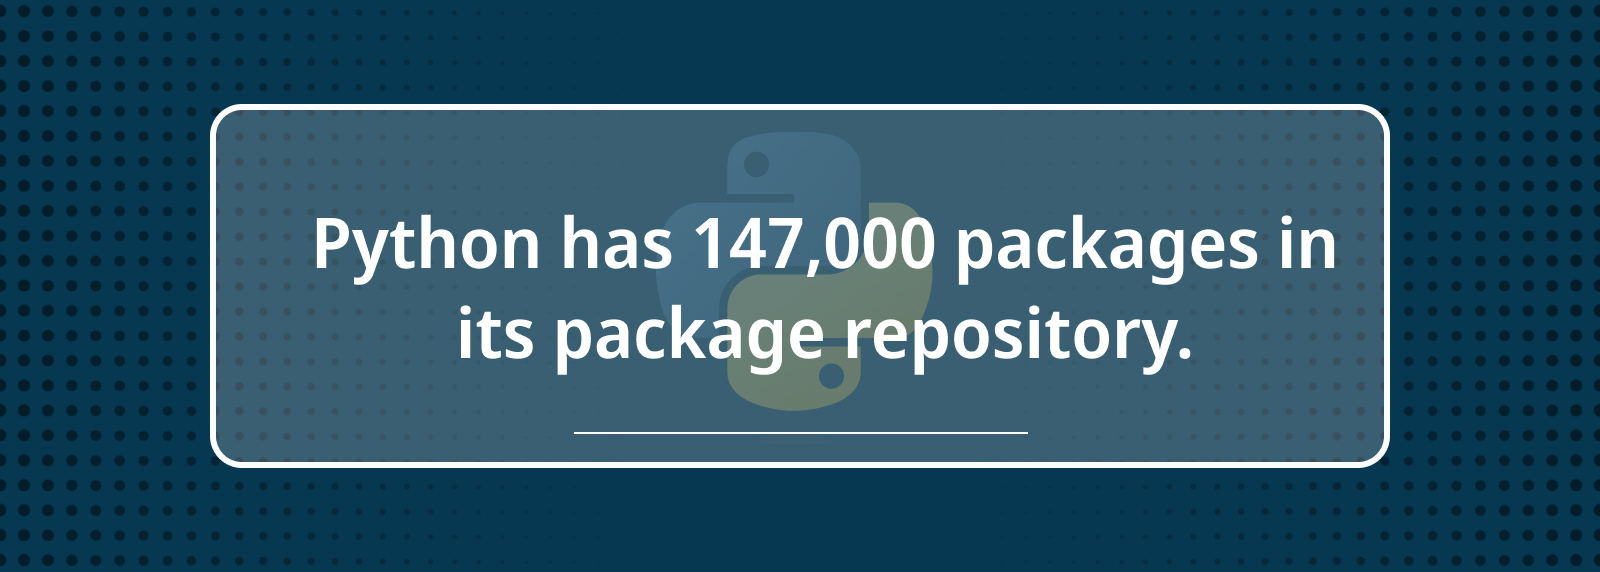 Python has 147,000 packages in its package repository